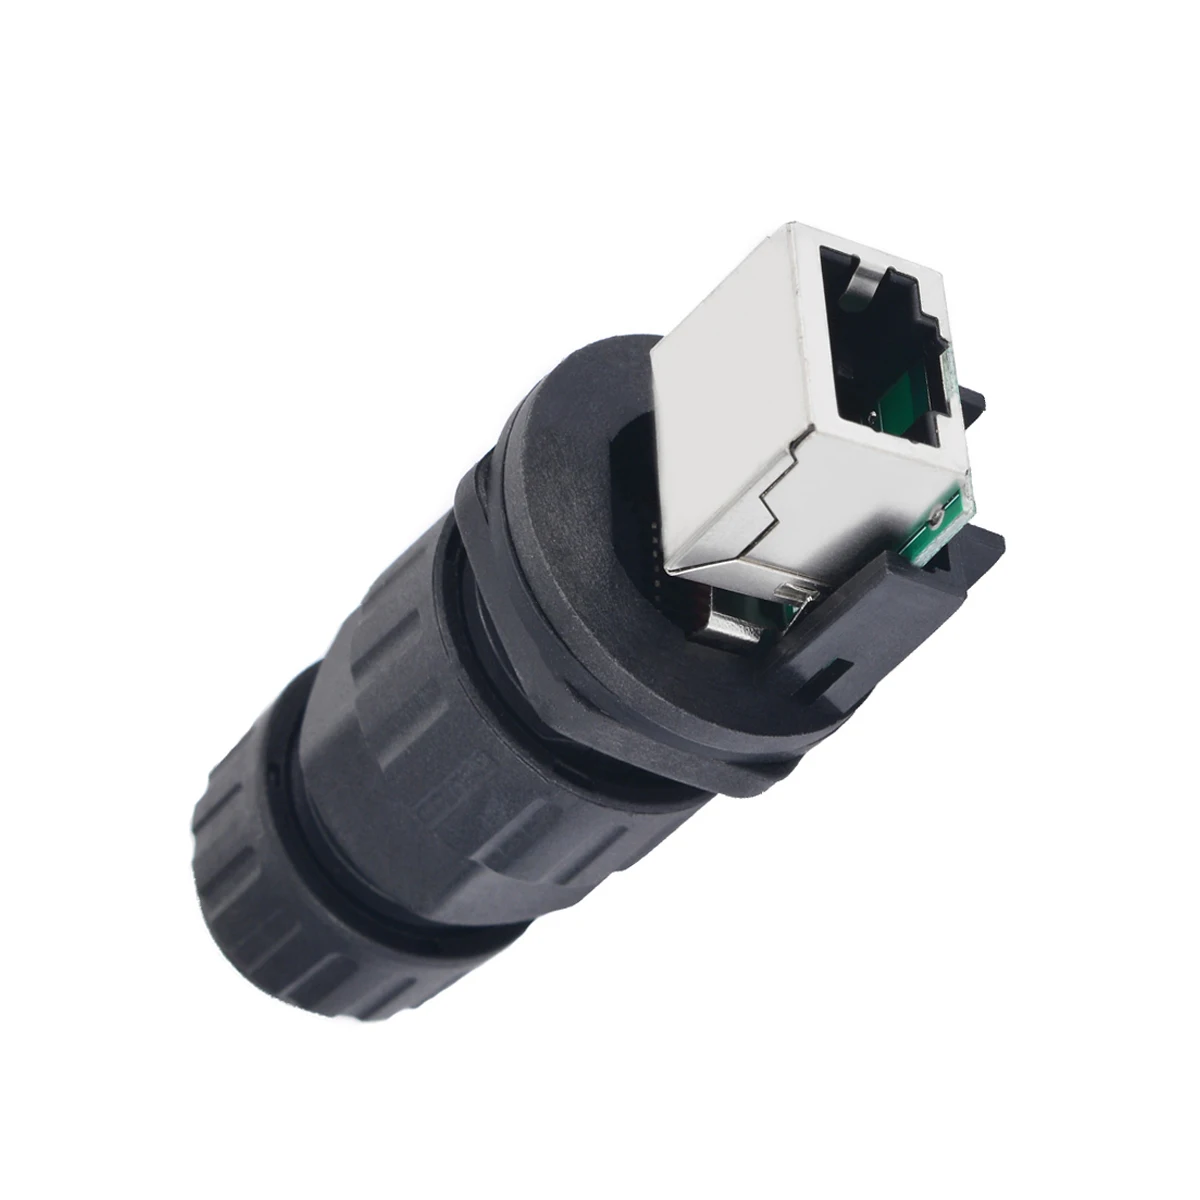 1pc RJ45 Interface IP68 Network Waterproof Connector Durable Pluggable Transposon Connectors 10mm Hole 8 Core For Outdoor AP Box